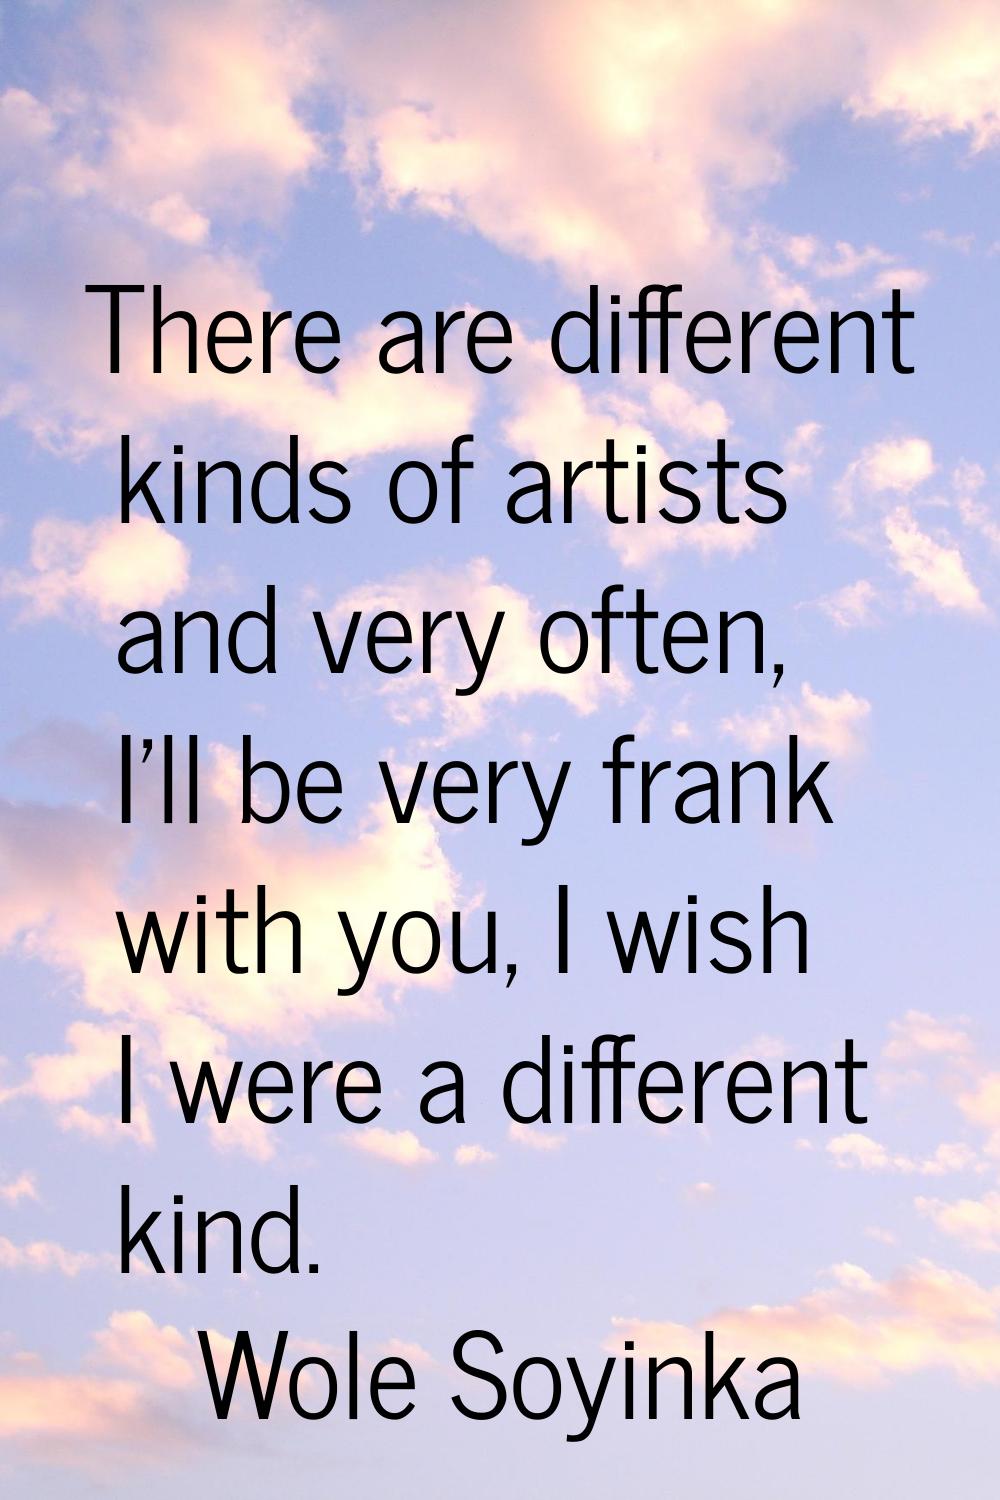 There are different kinds of artists and very often, I'll be very frank with you, I wish I were a d